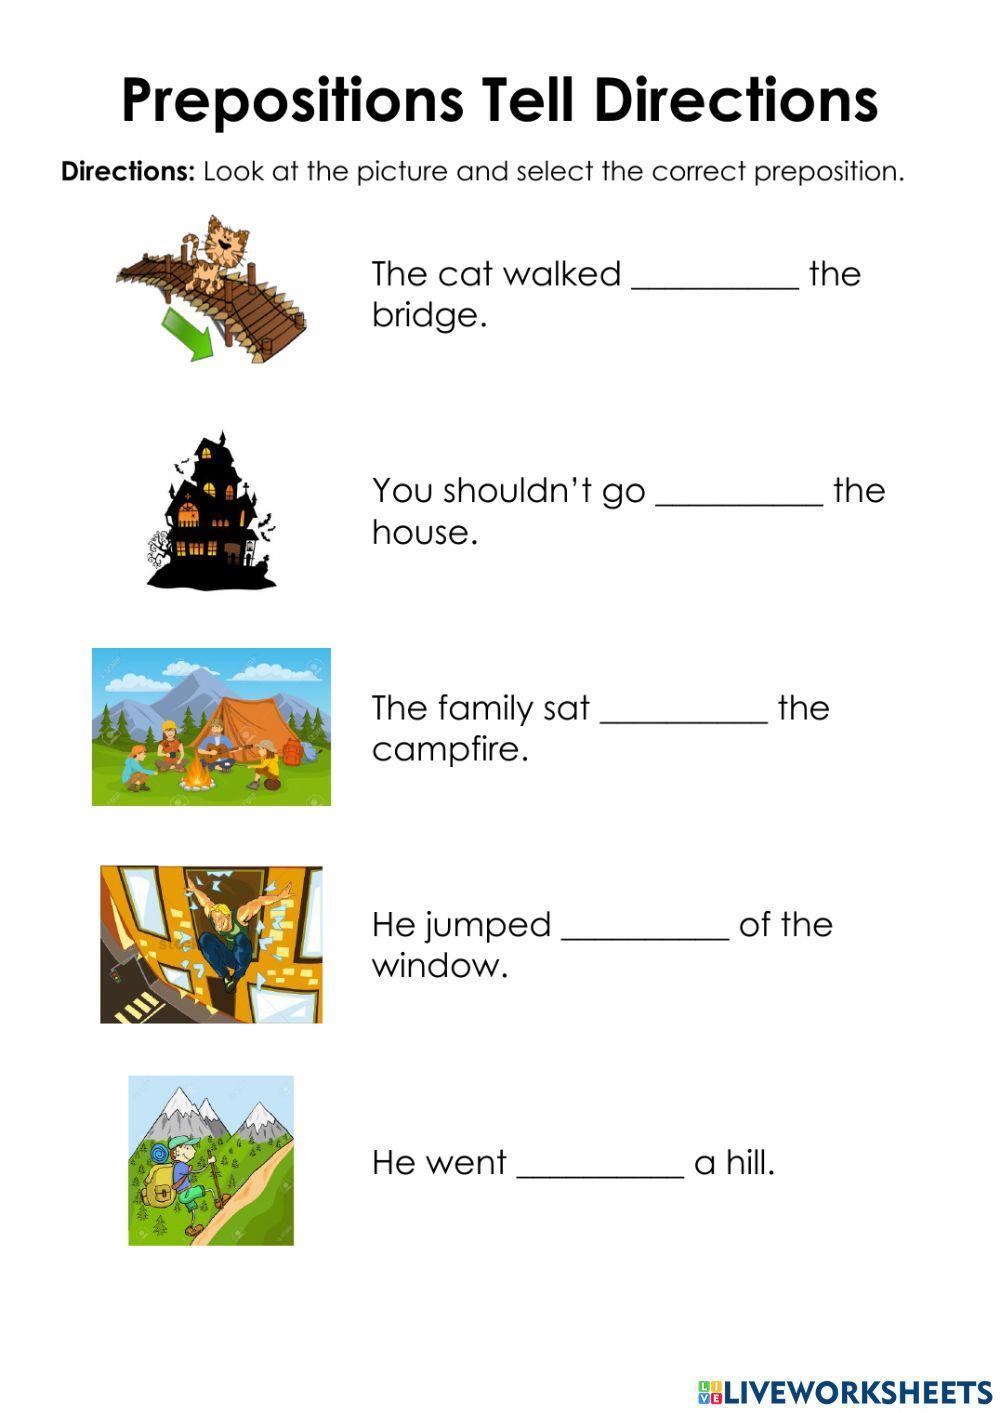 Prepositions Tell Directions